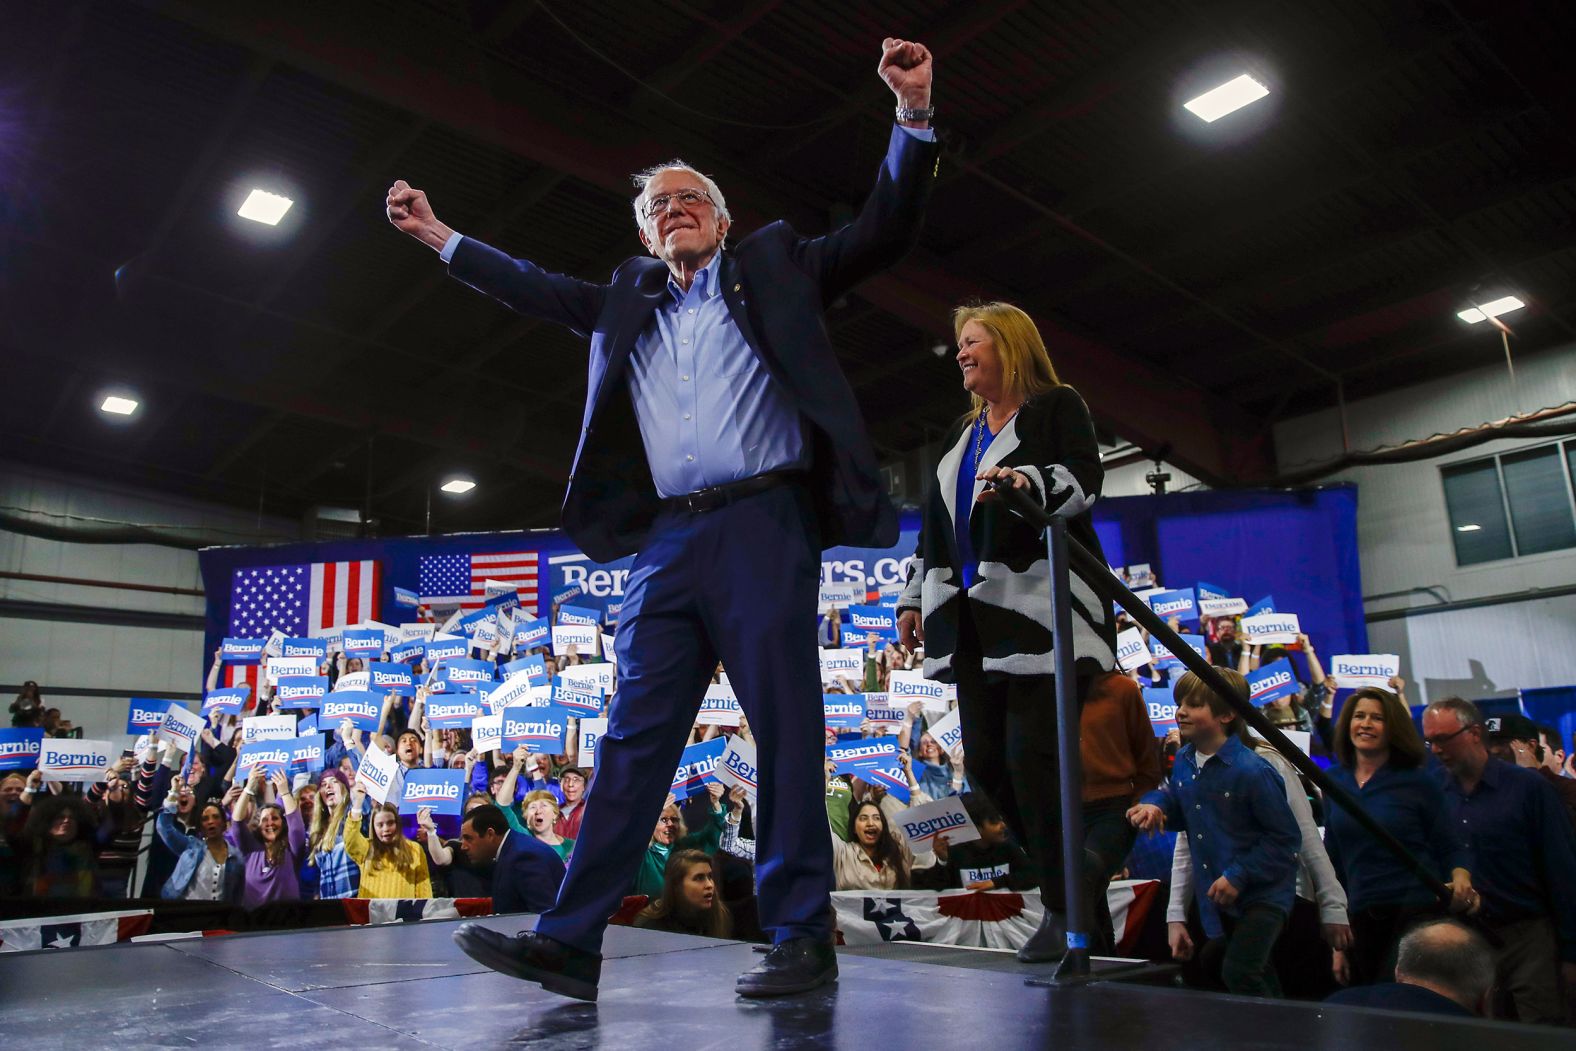 US Sen. Bernie Sanders is accompanied by his wife, Jane, at his primary night rally in Essex Junction, Vermont. "We're not only taking on the corporate establishment. We're taking on the political establishment," <a href="index.php?page=&url=https%3A%2F%2Fwww.cnn.com%2Fpolitics%2Flive-news%2Fsuper-tuesday-results-2020%2Fh_7f15fbe7794c42b559175ee3fd140a3f" target="_blank">Sanders told his supporters.</a>